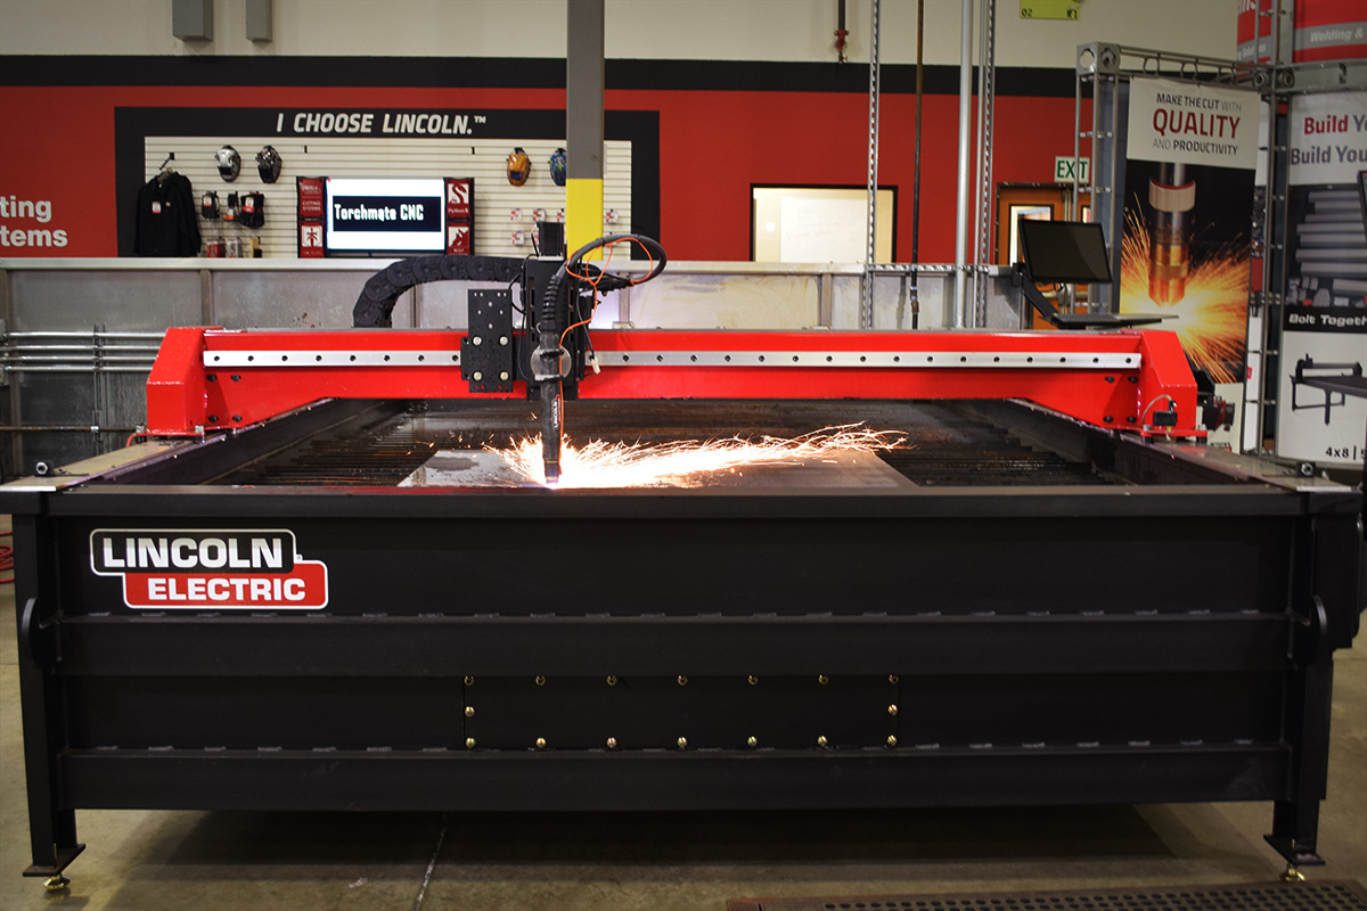 Torchmate X A Light Industrial Cnc Plasma Cutting Table Torchmate